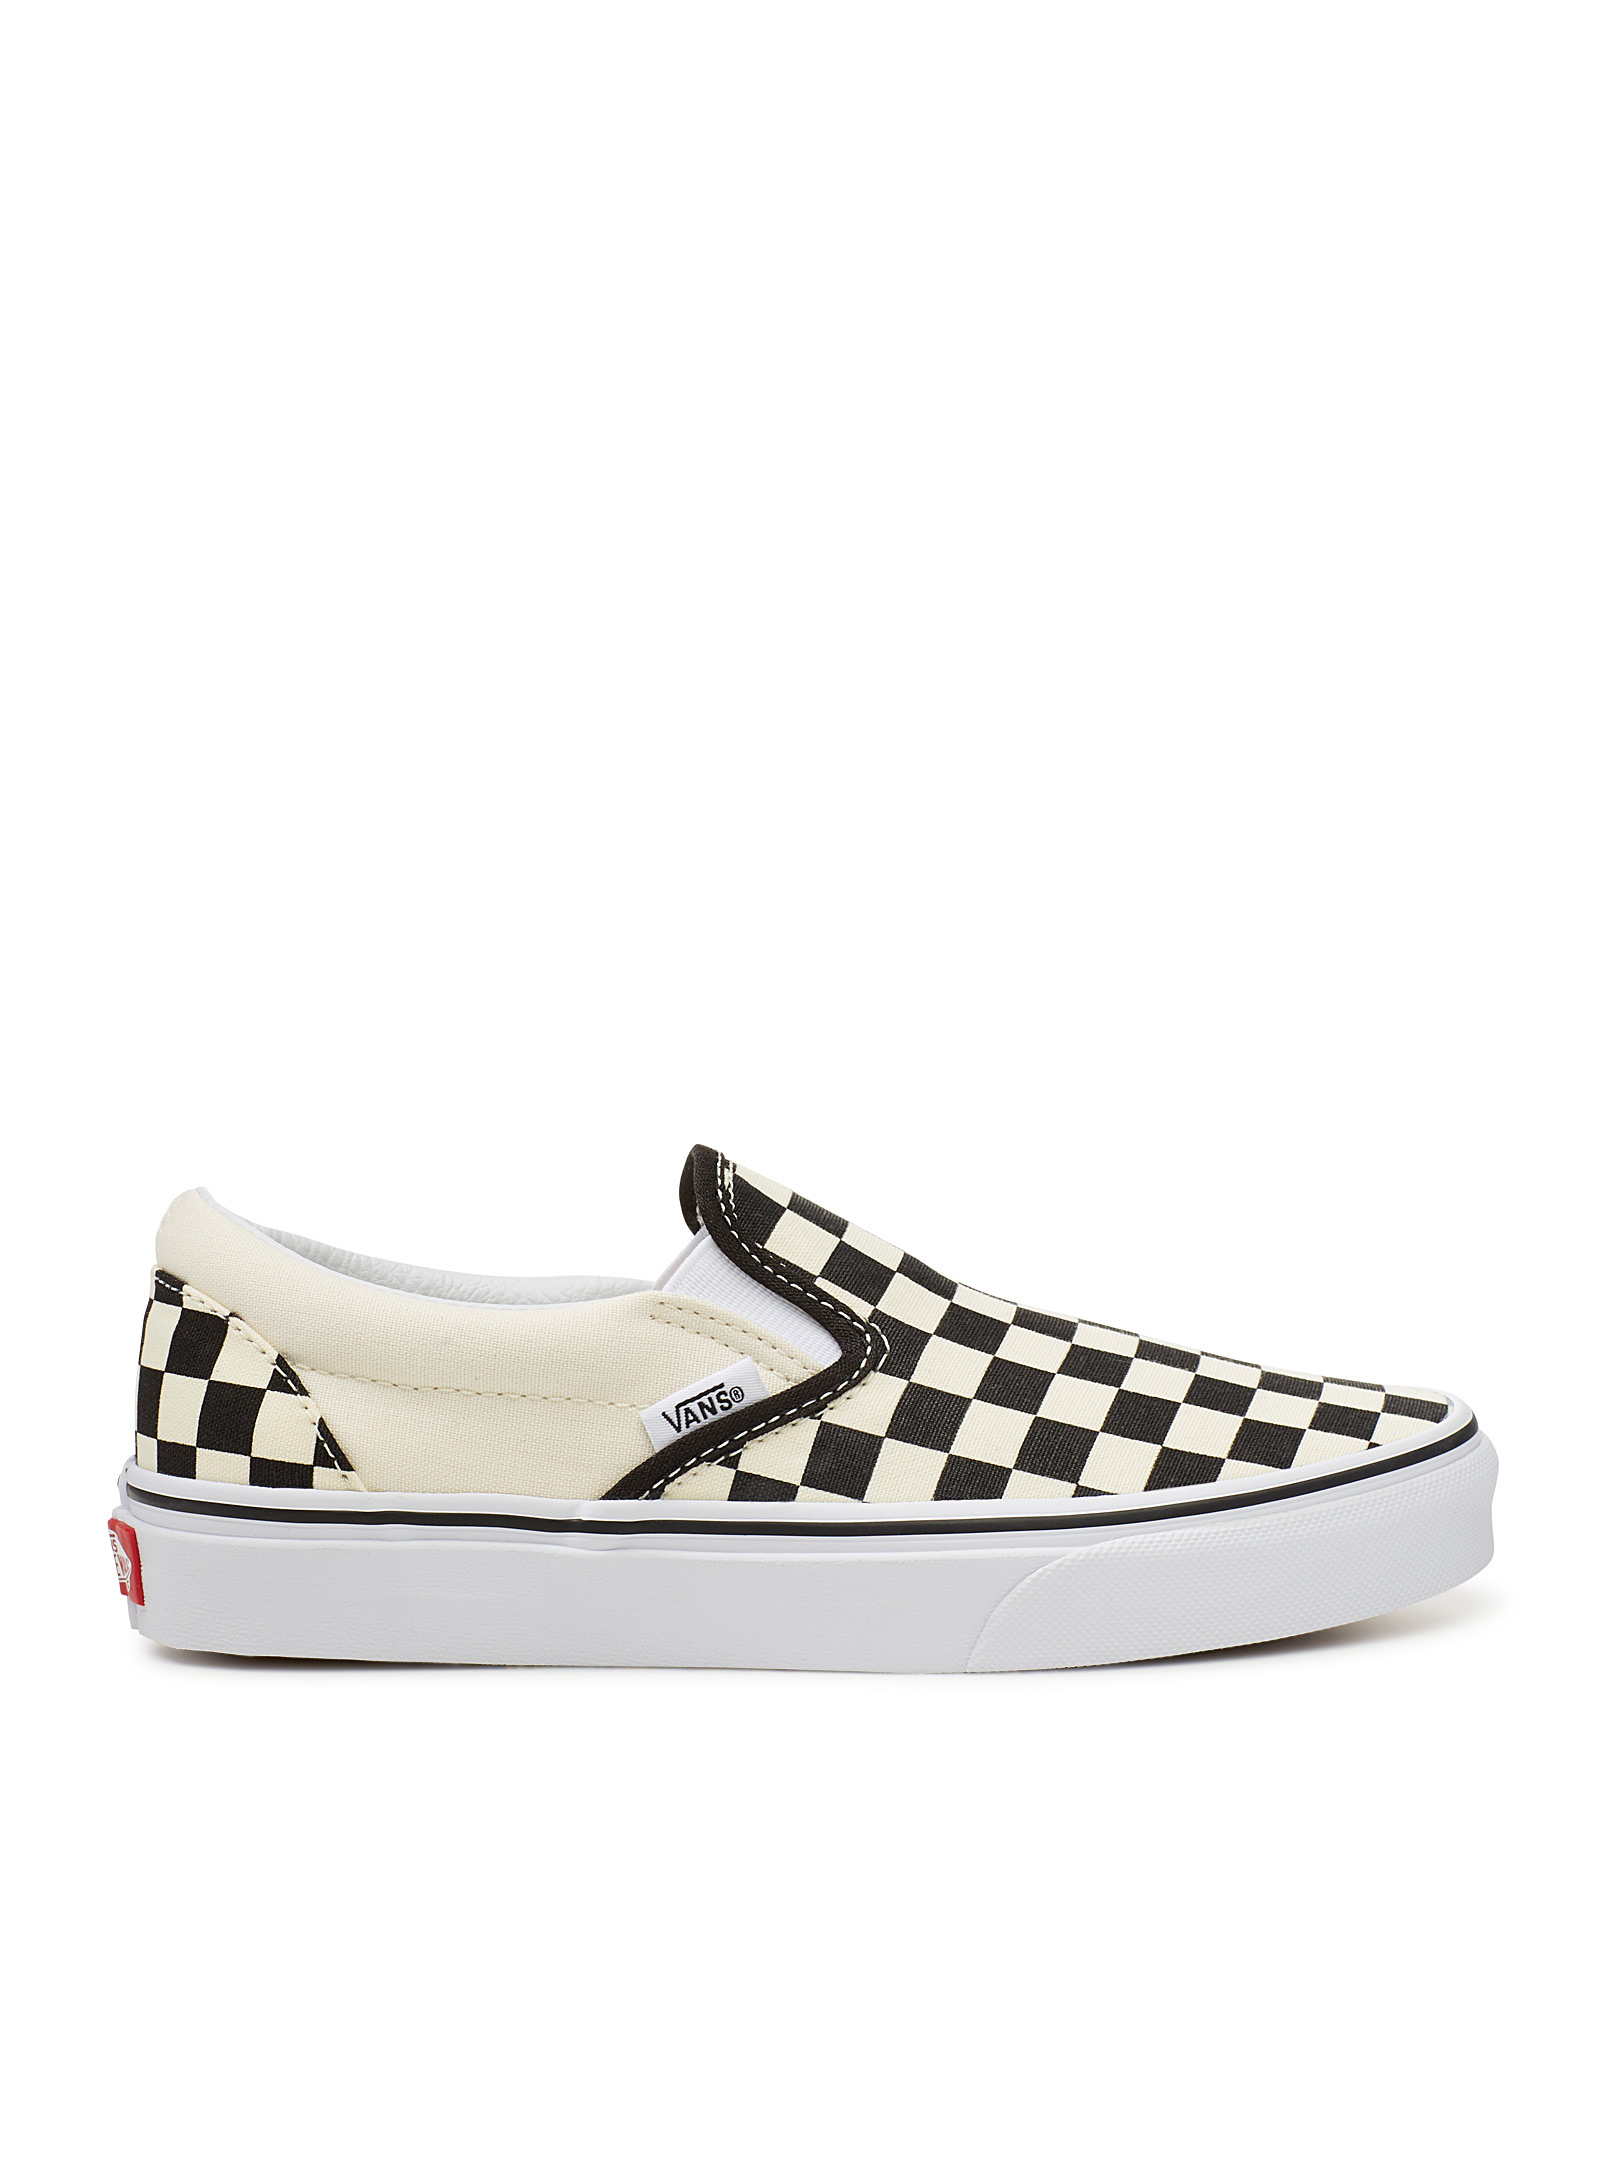 Vans - Chaussures Le Slip-On Checkerboard Femme